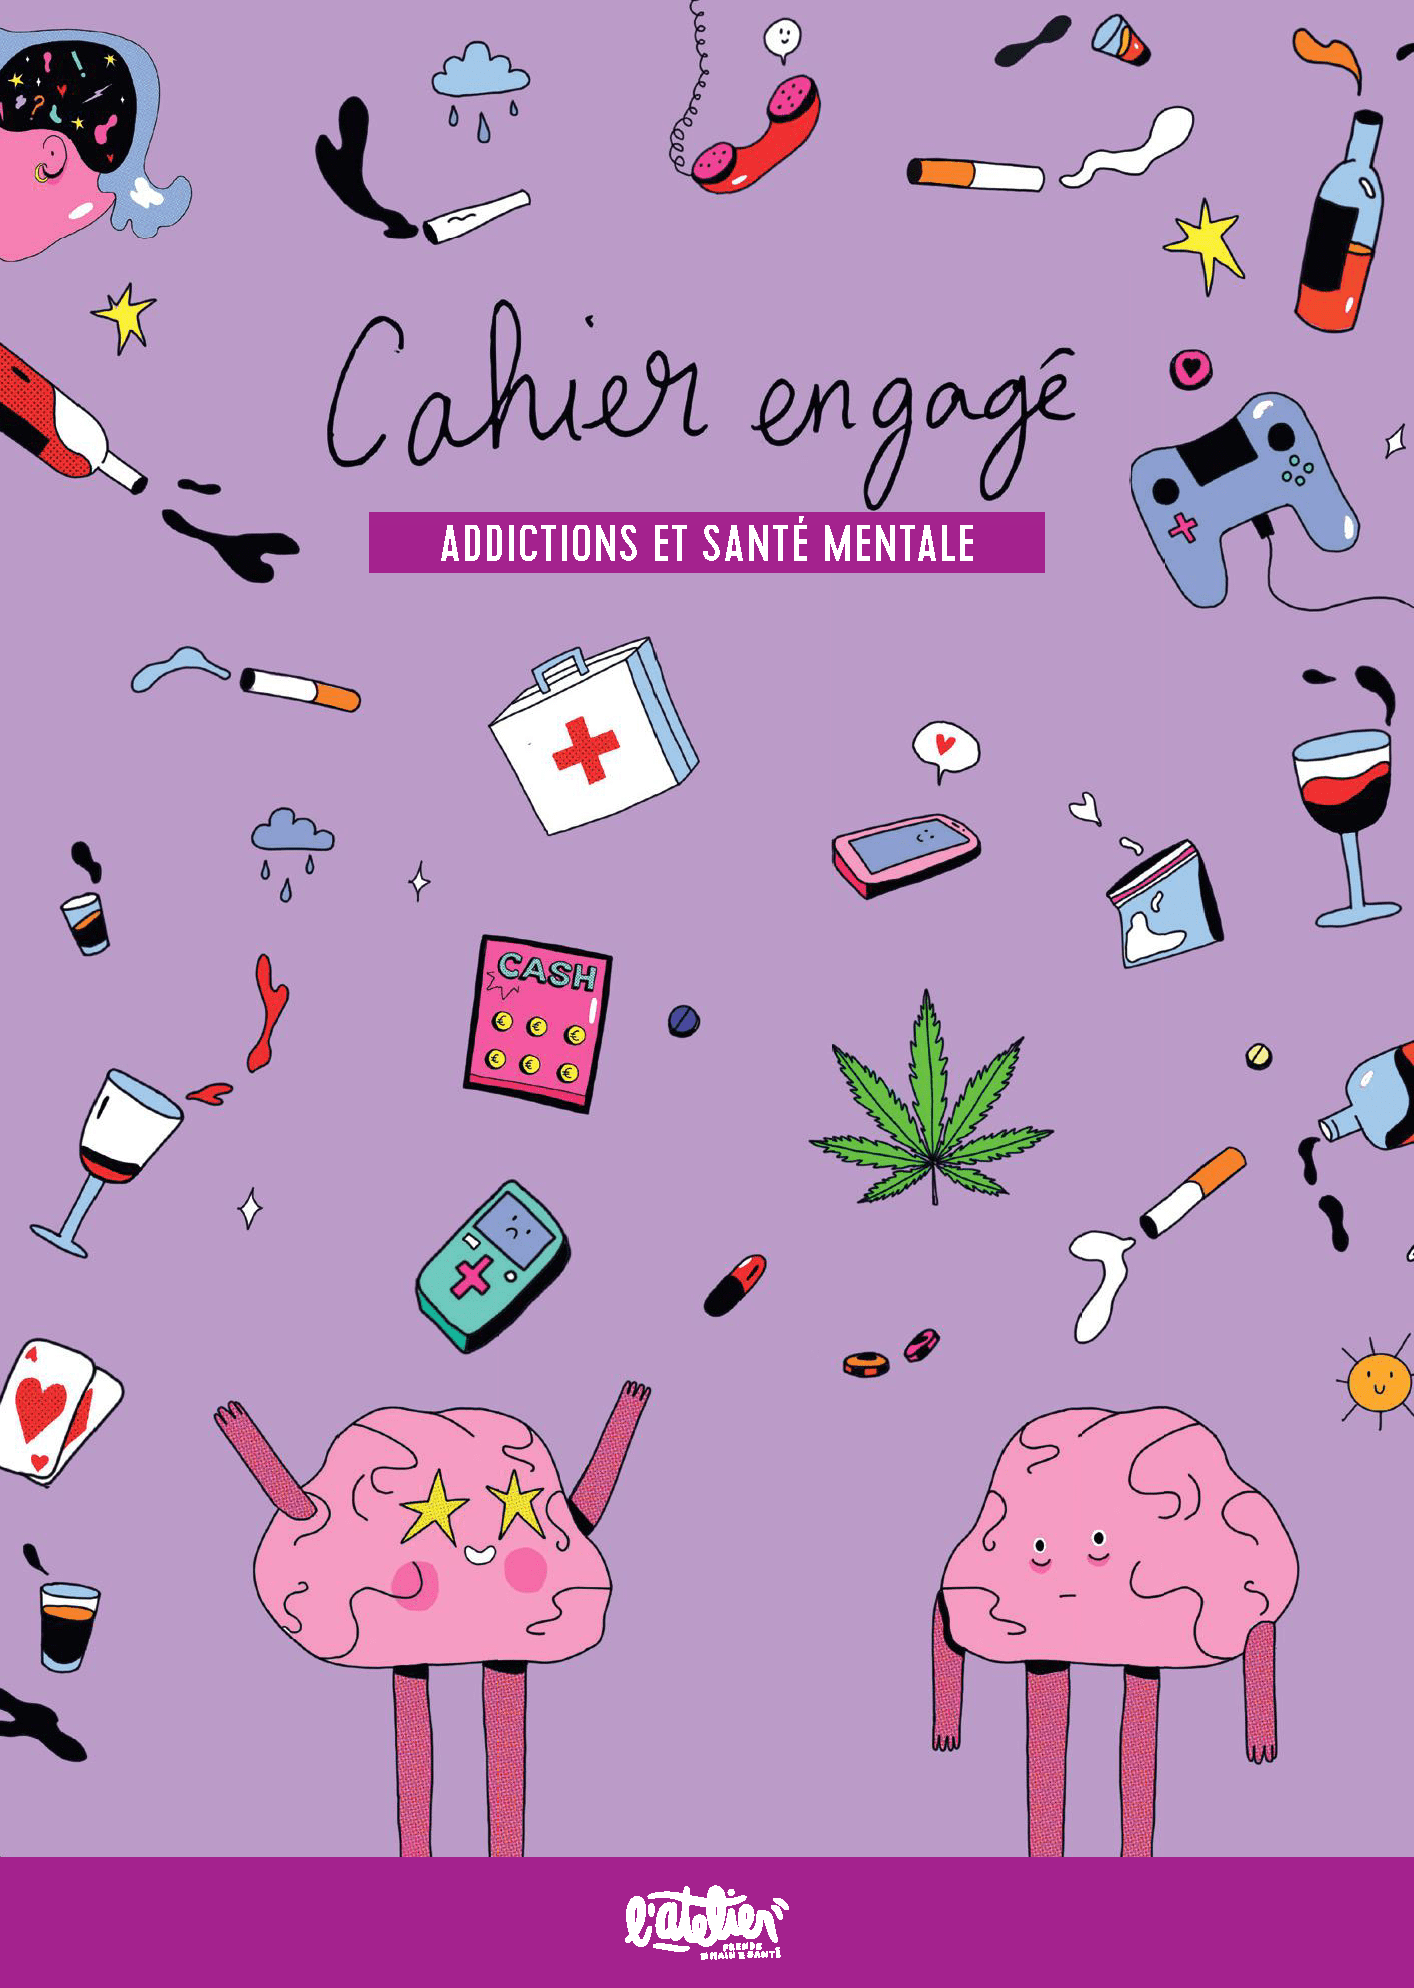 crips_cahier_engage_addictions_couverture